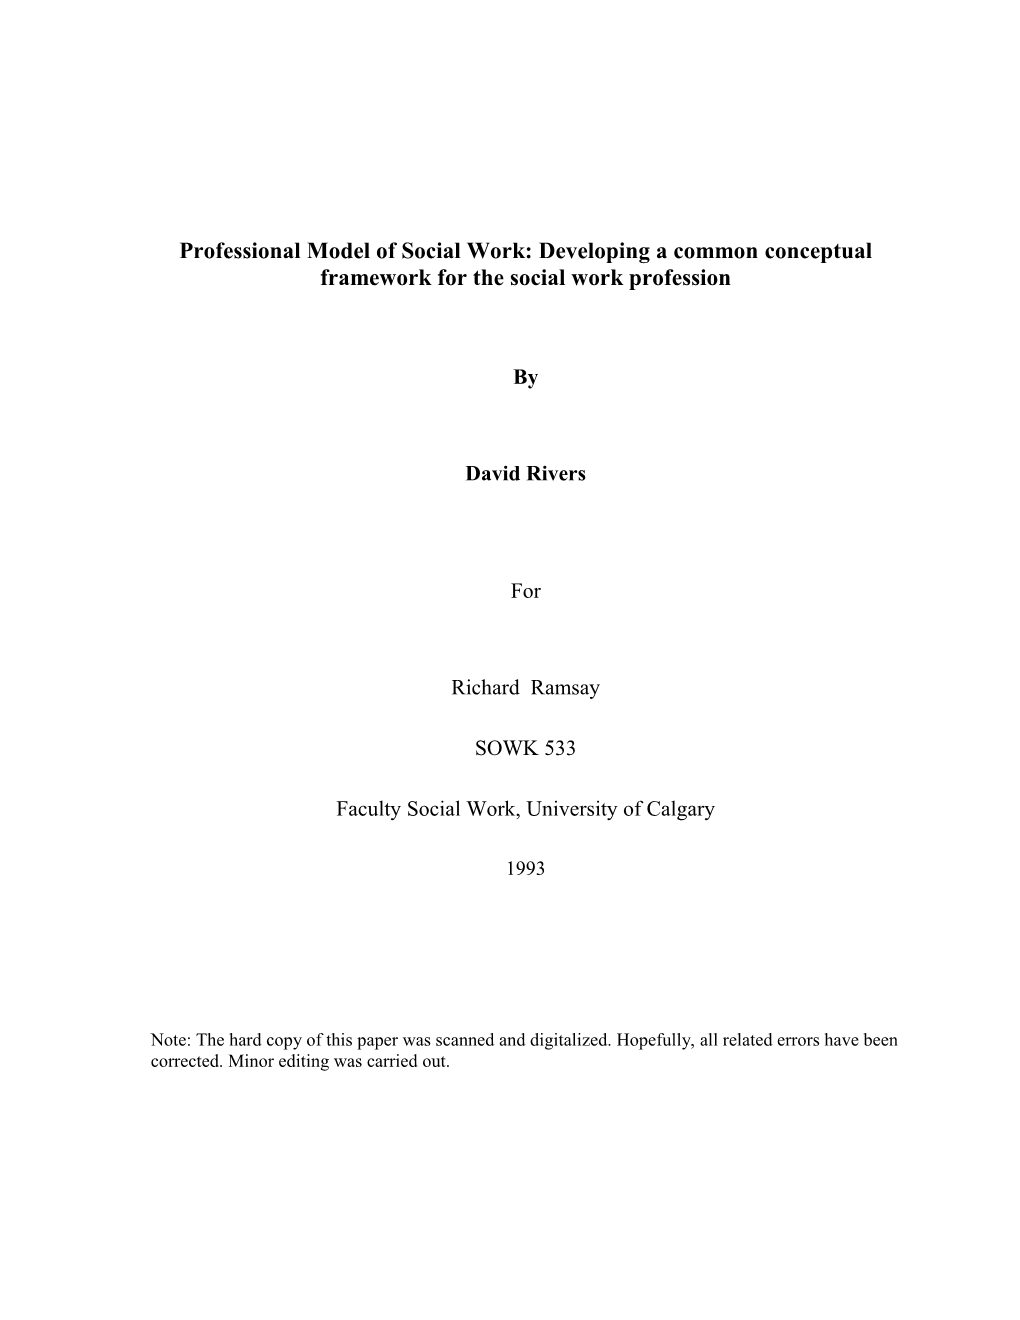 Professional Model of Social Work: Developing a Common Conceptual Framework for the Social